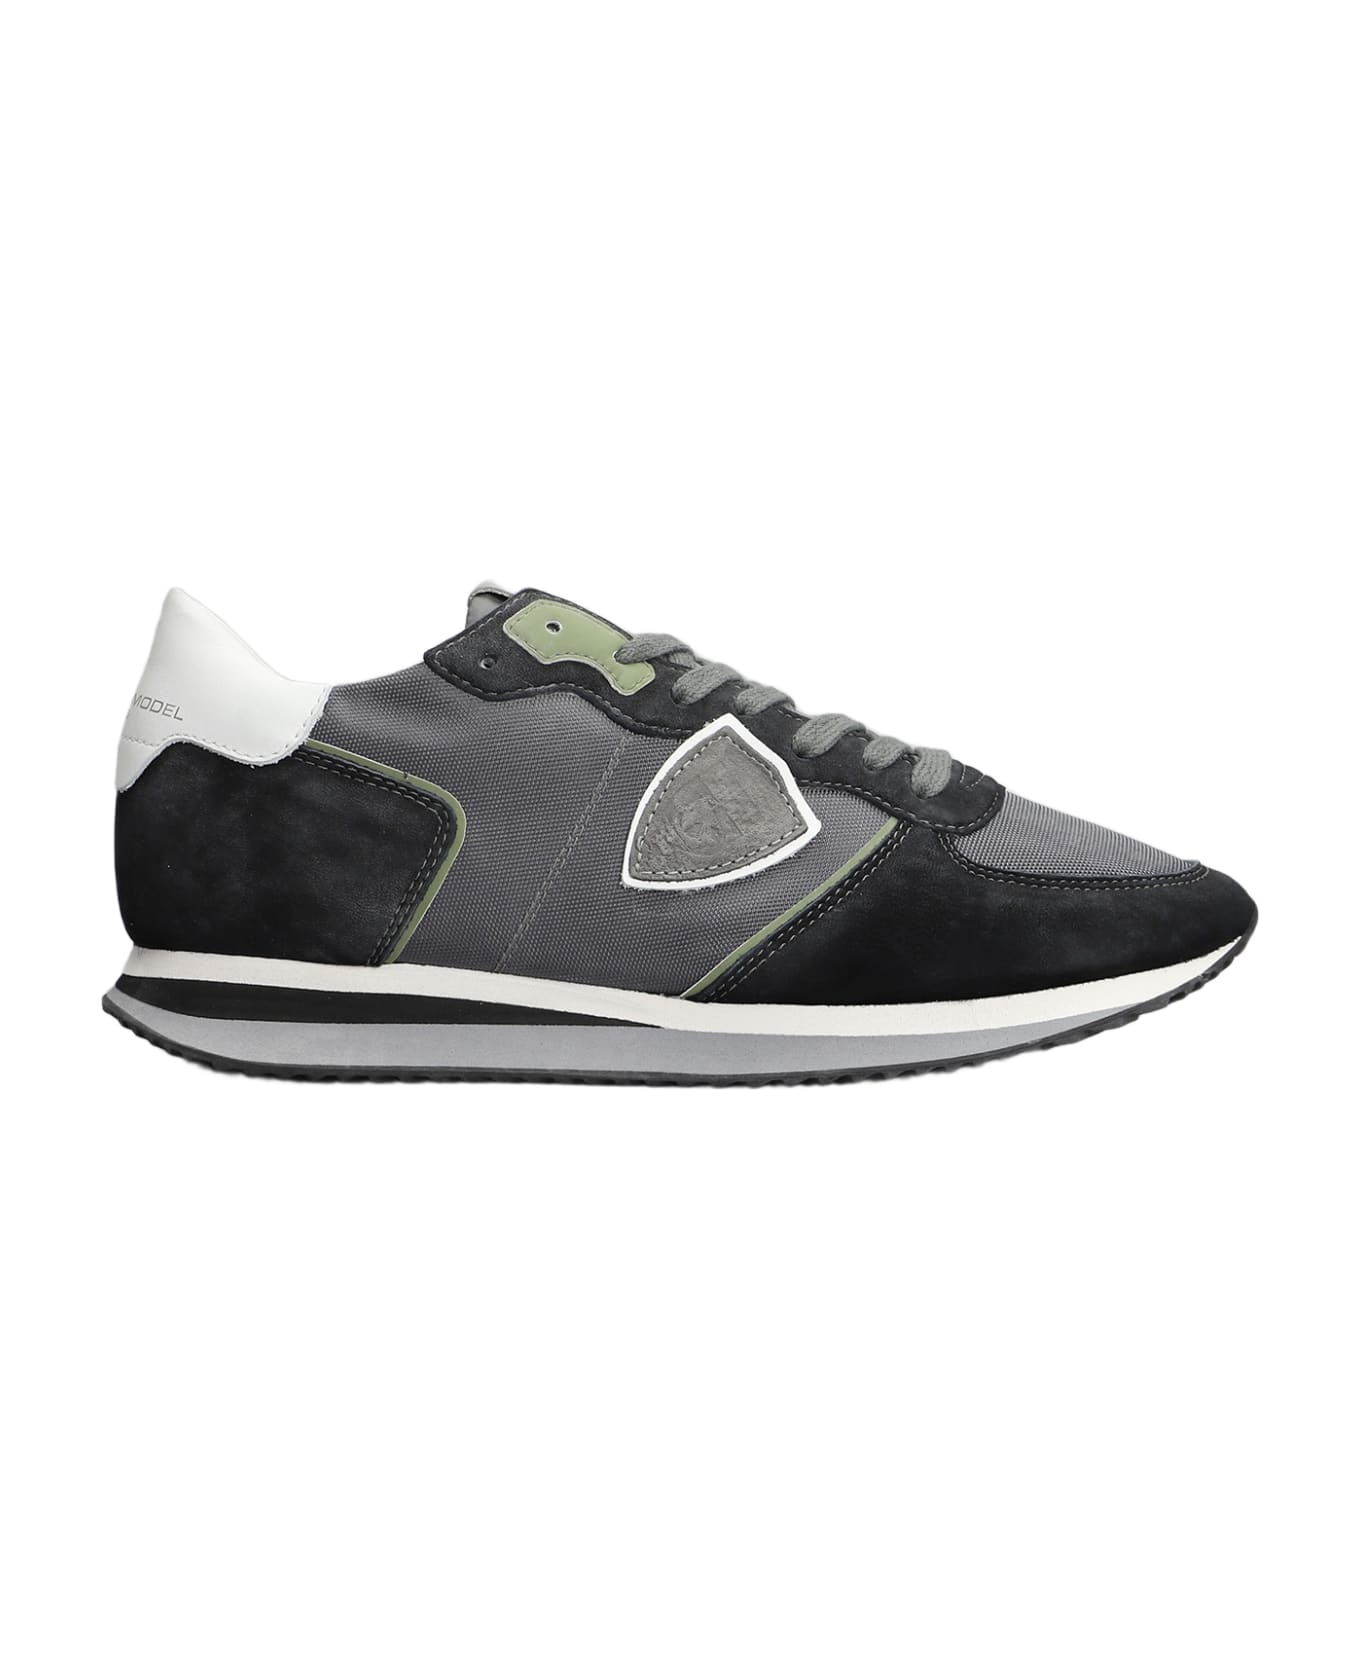 Philippe Model Trpx Low Sneakers In Grey Suede And Fabric - grey